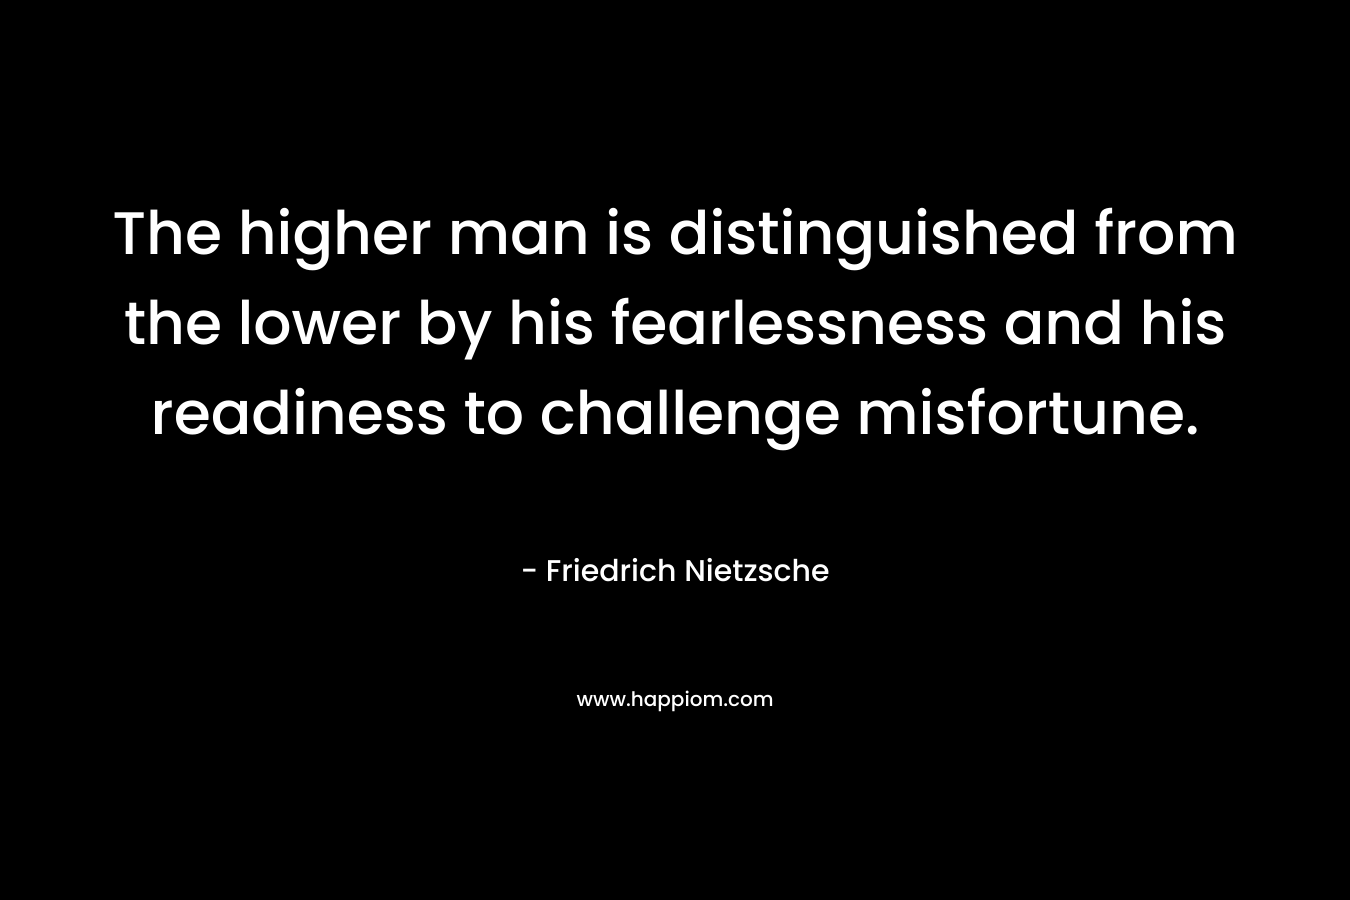 The higher man is distinguished from the lower by his fearlessness and his readiness to challenge misfortune. – Friedrich Nietzsche